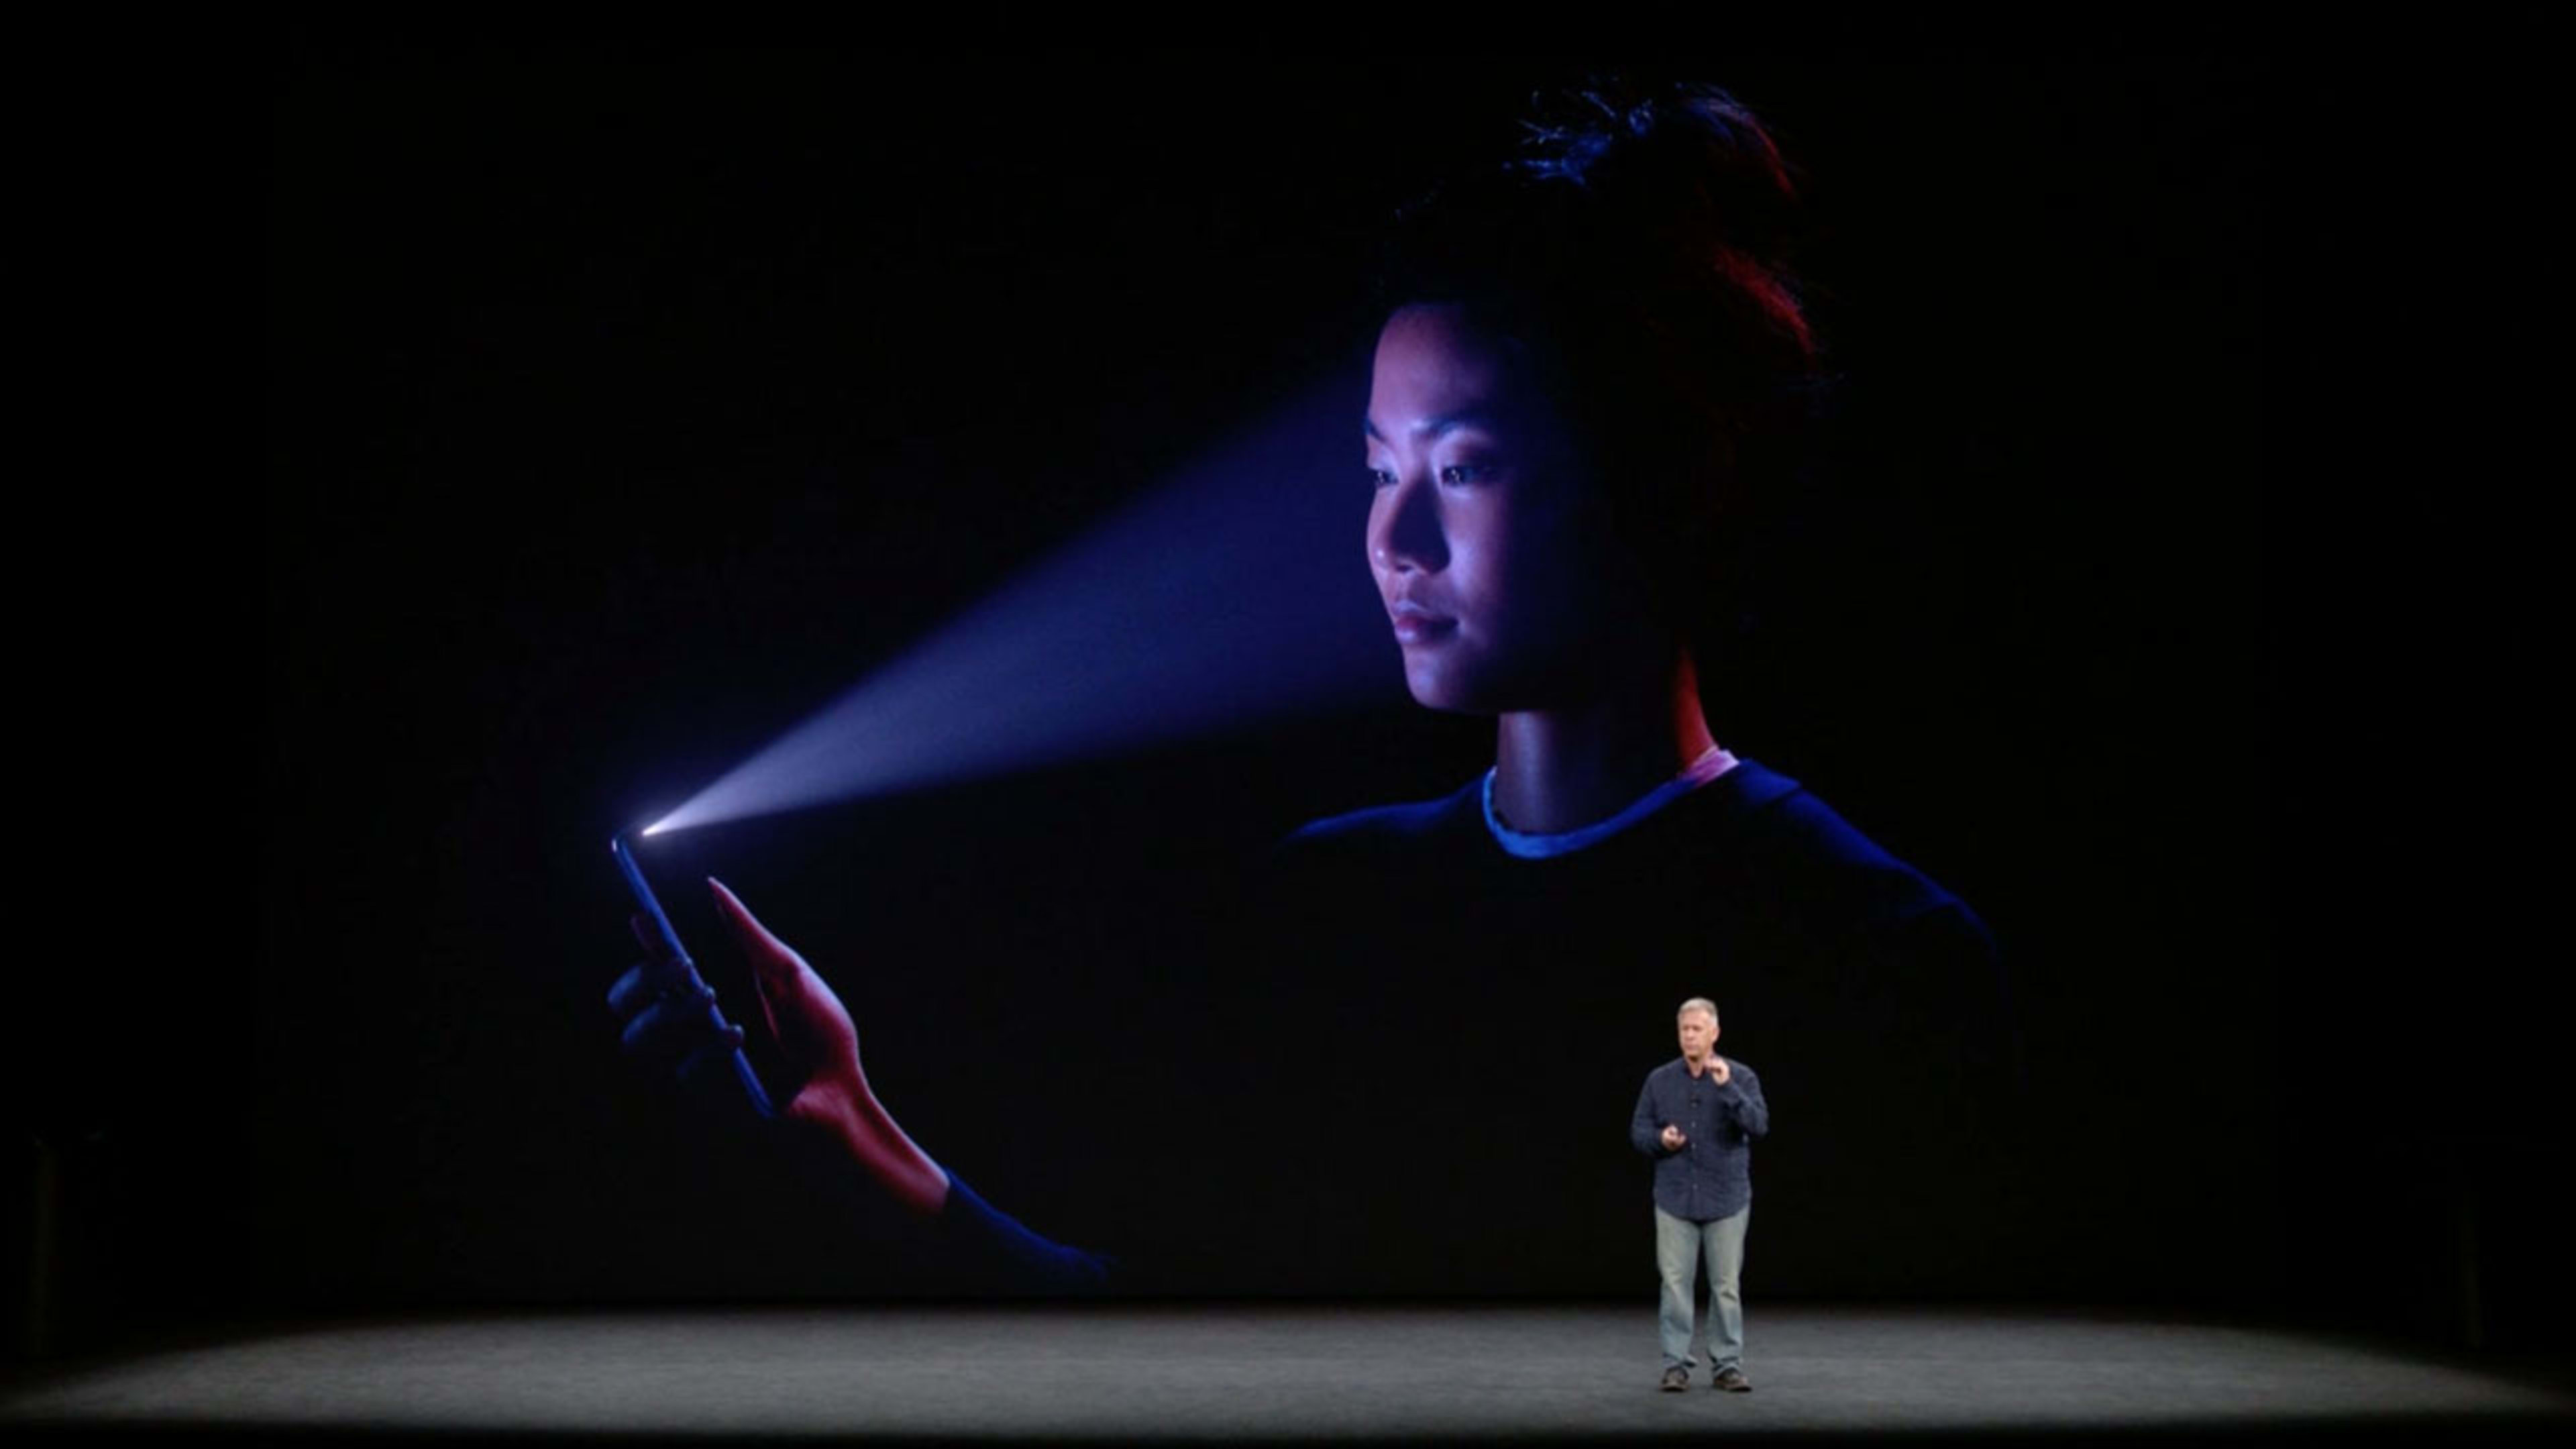 People are understandably freaked out by Apple’s Face ID biometric security